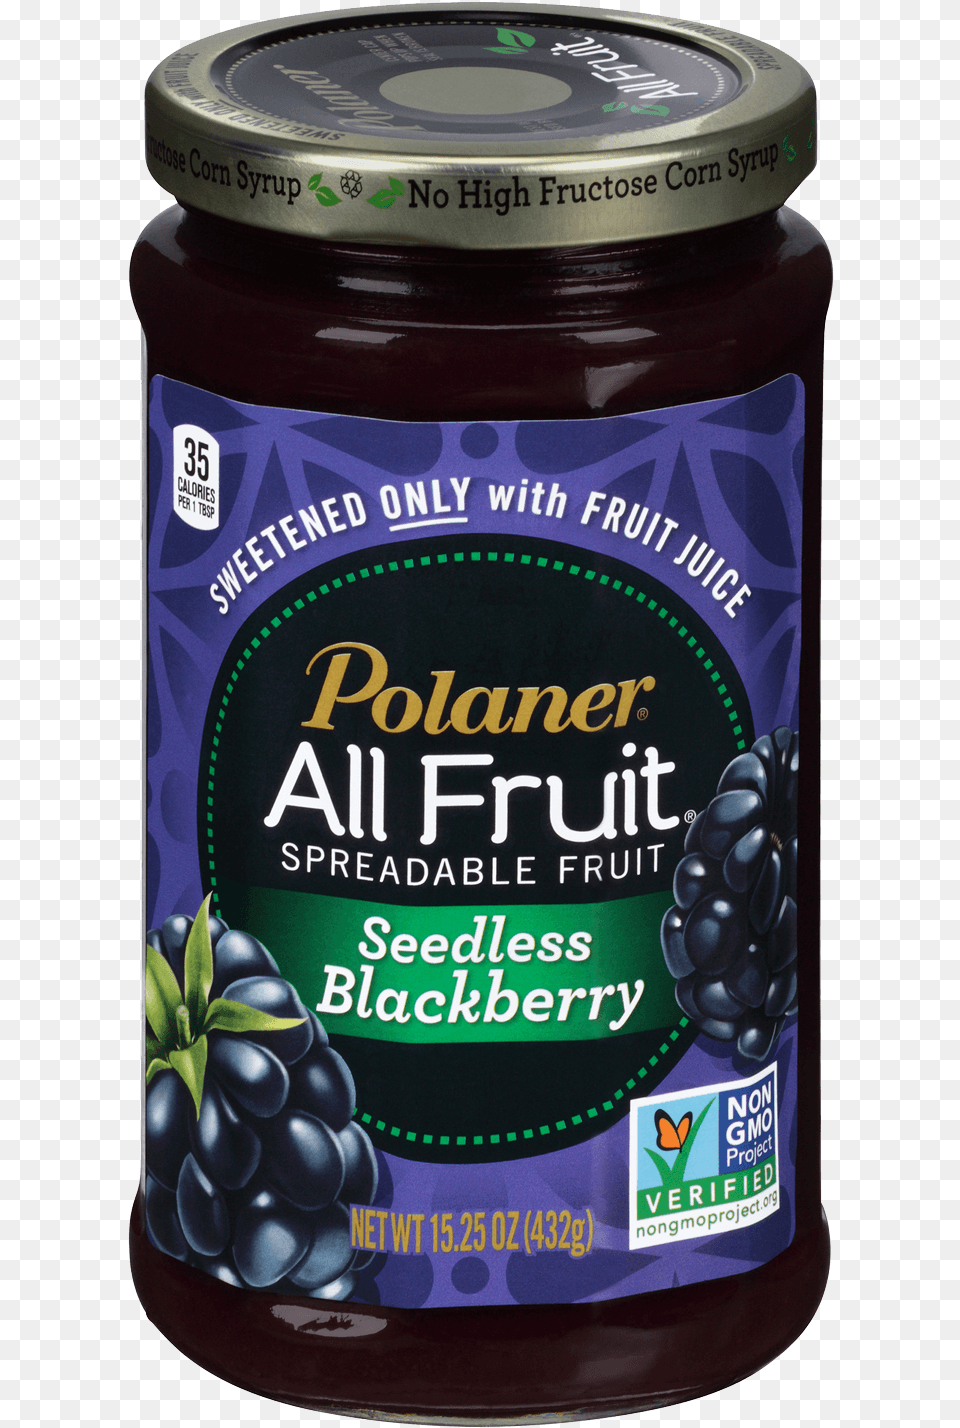 Seedless Blackberry All Fruit Blueberry Spread, Food, Jam, Jelly, Can Png